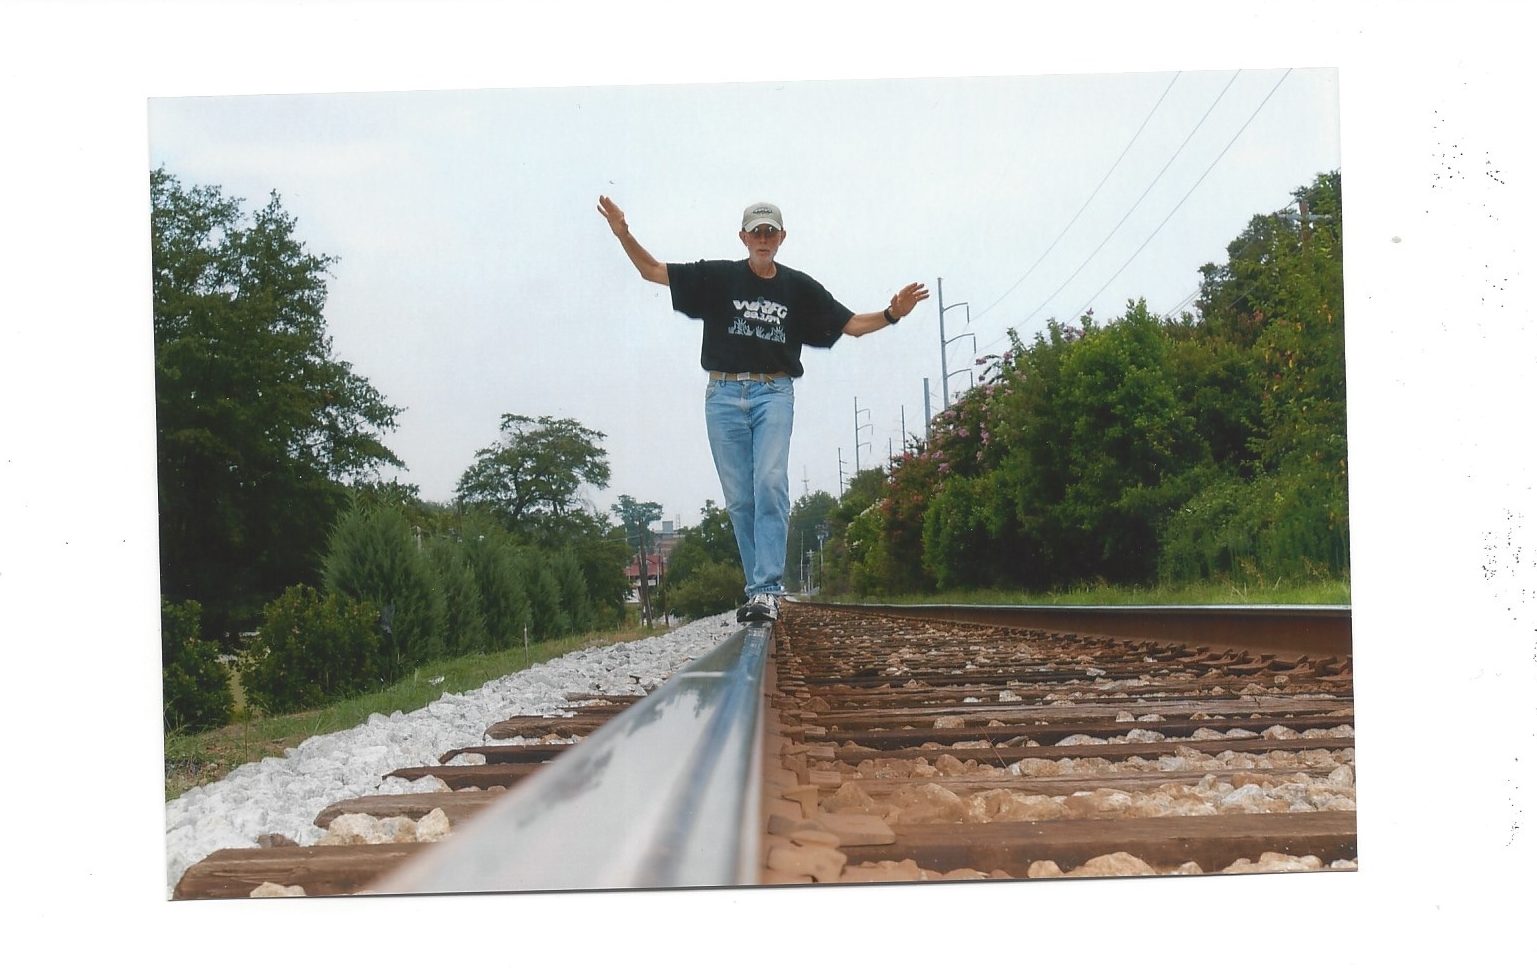 Brian Sherman, wearing blue jeans and black shirt while walking on train tracks